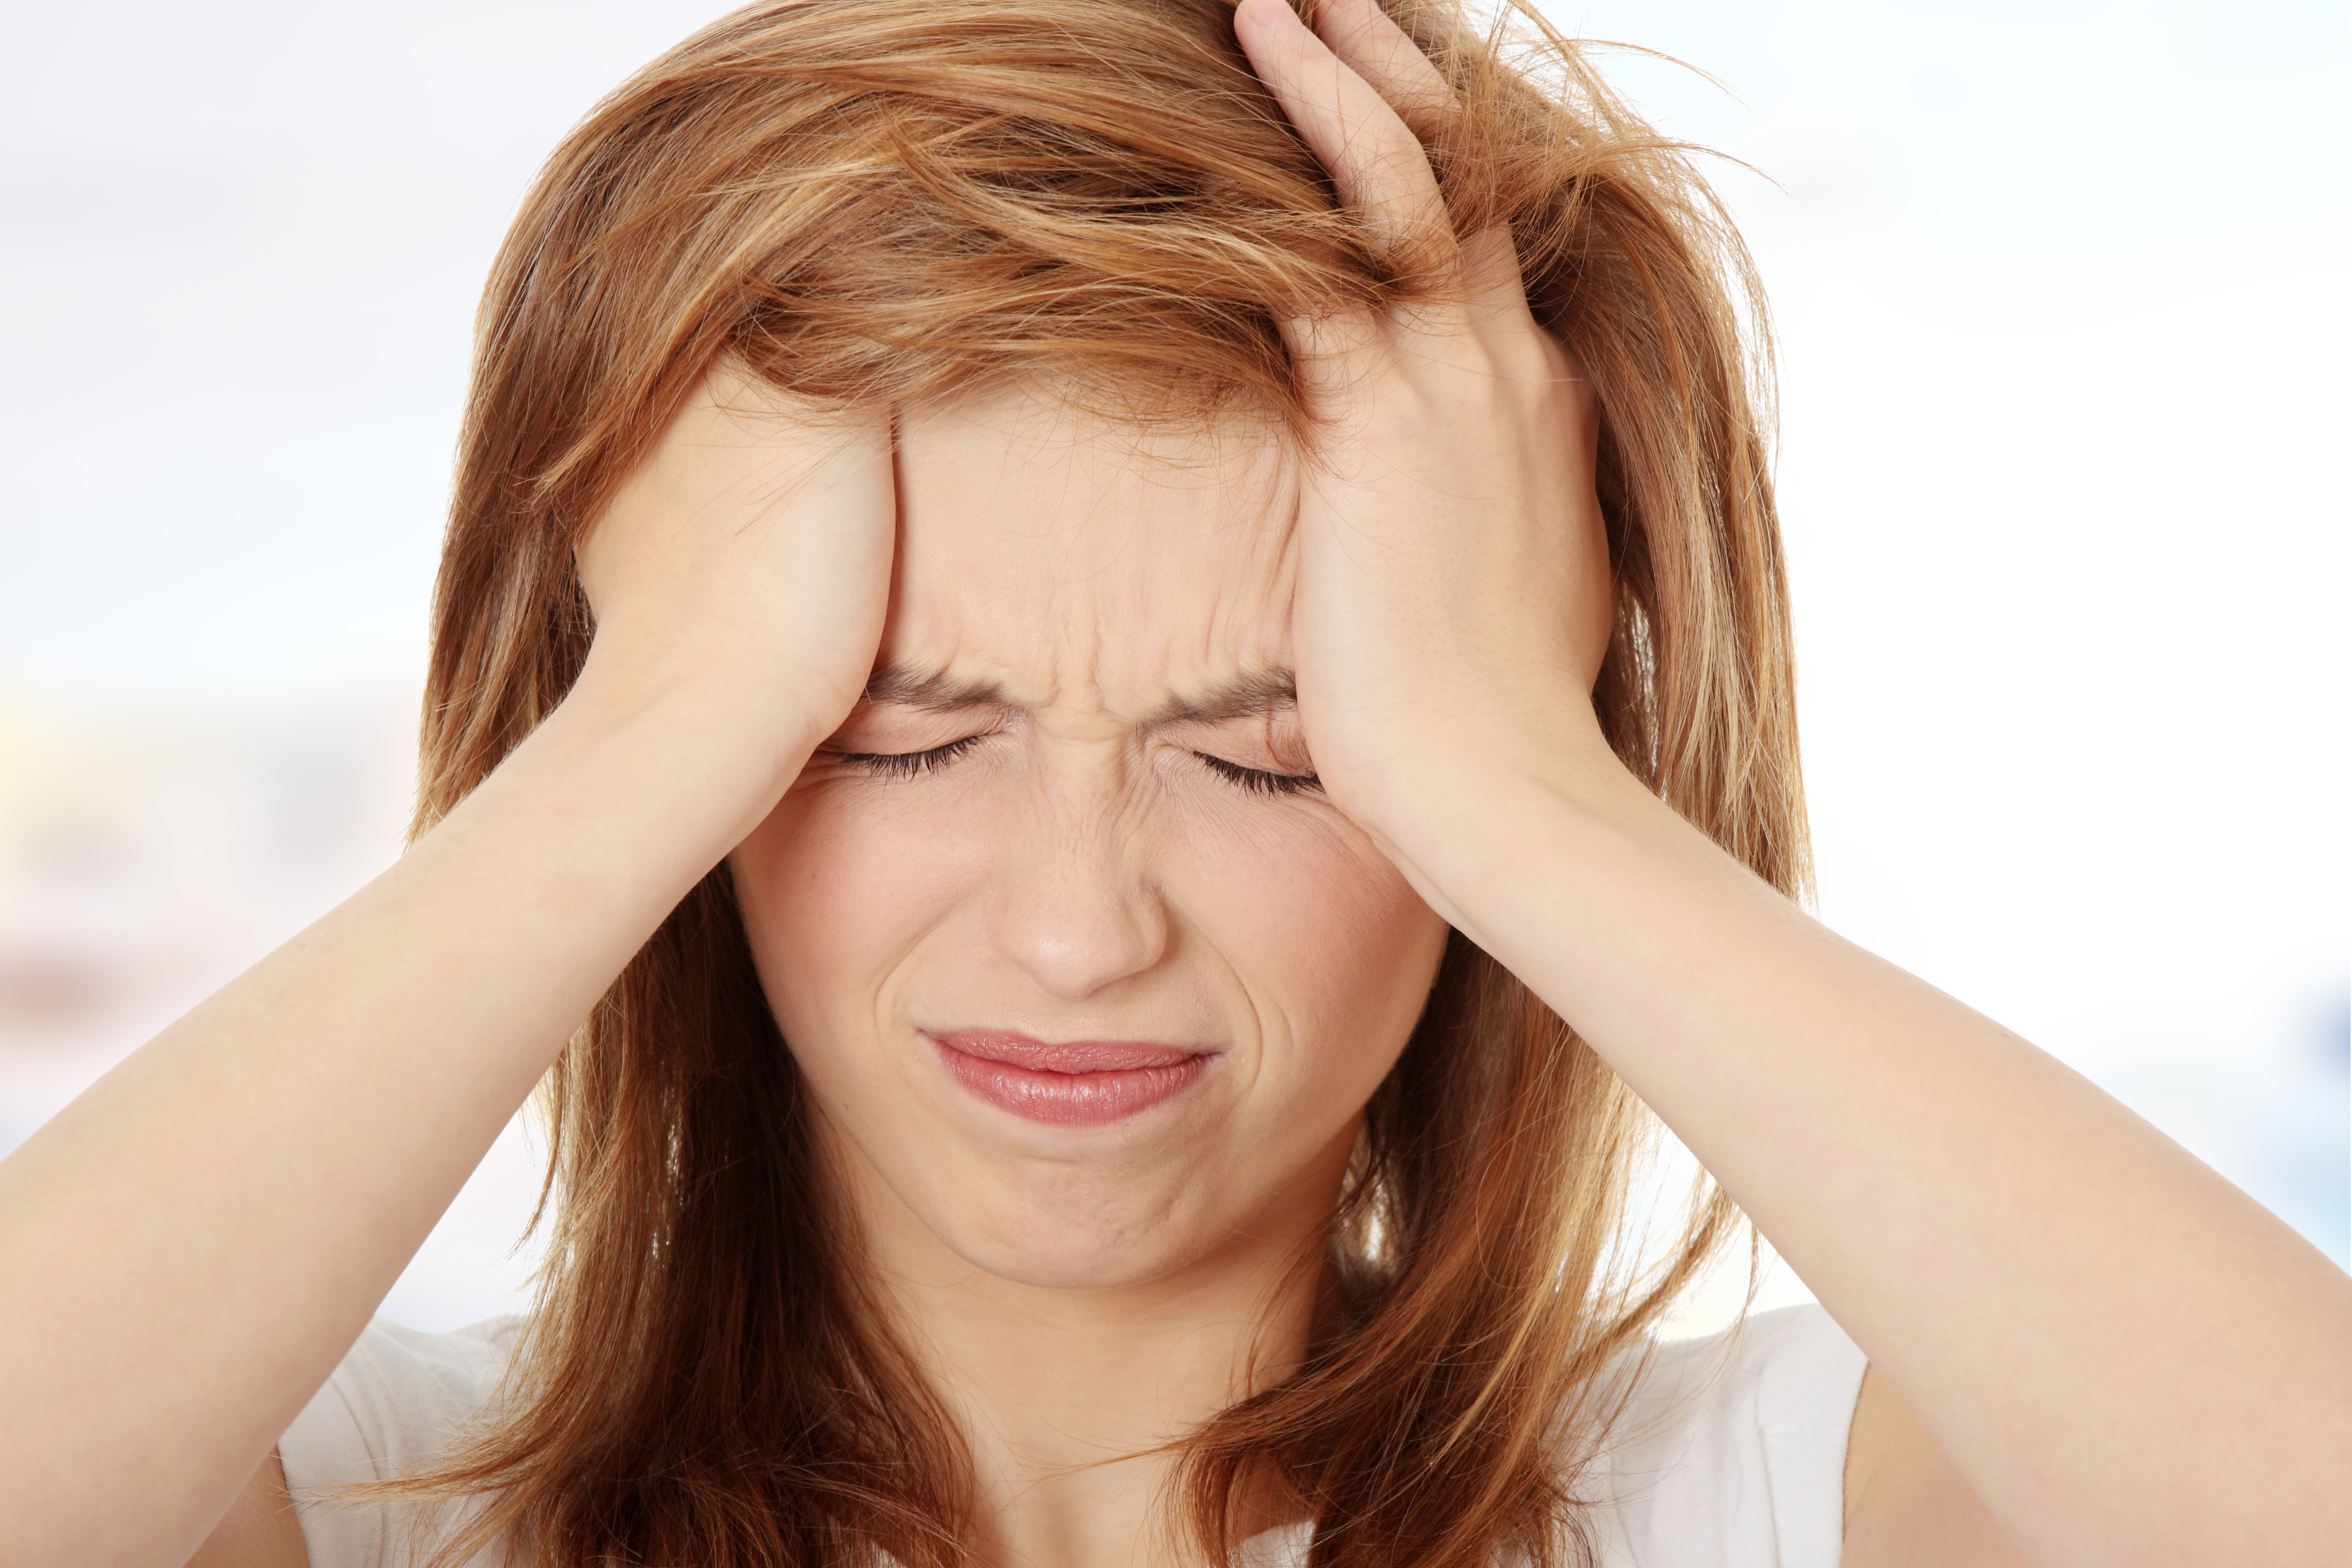 Can Wisdom Teeth Removal Cause Headache & for How Long After?